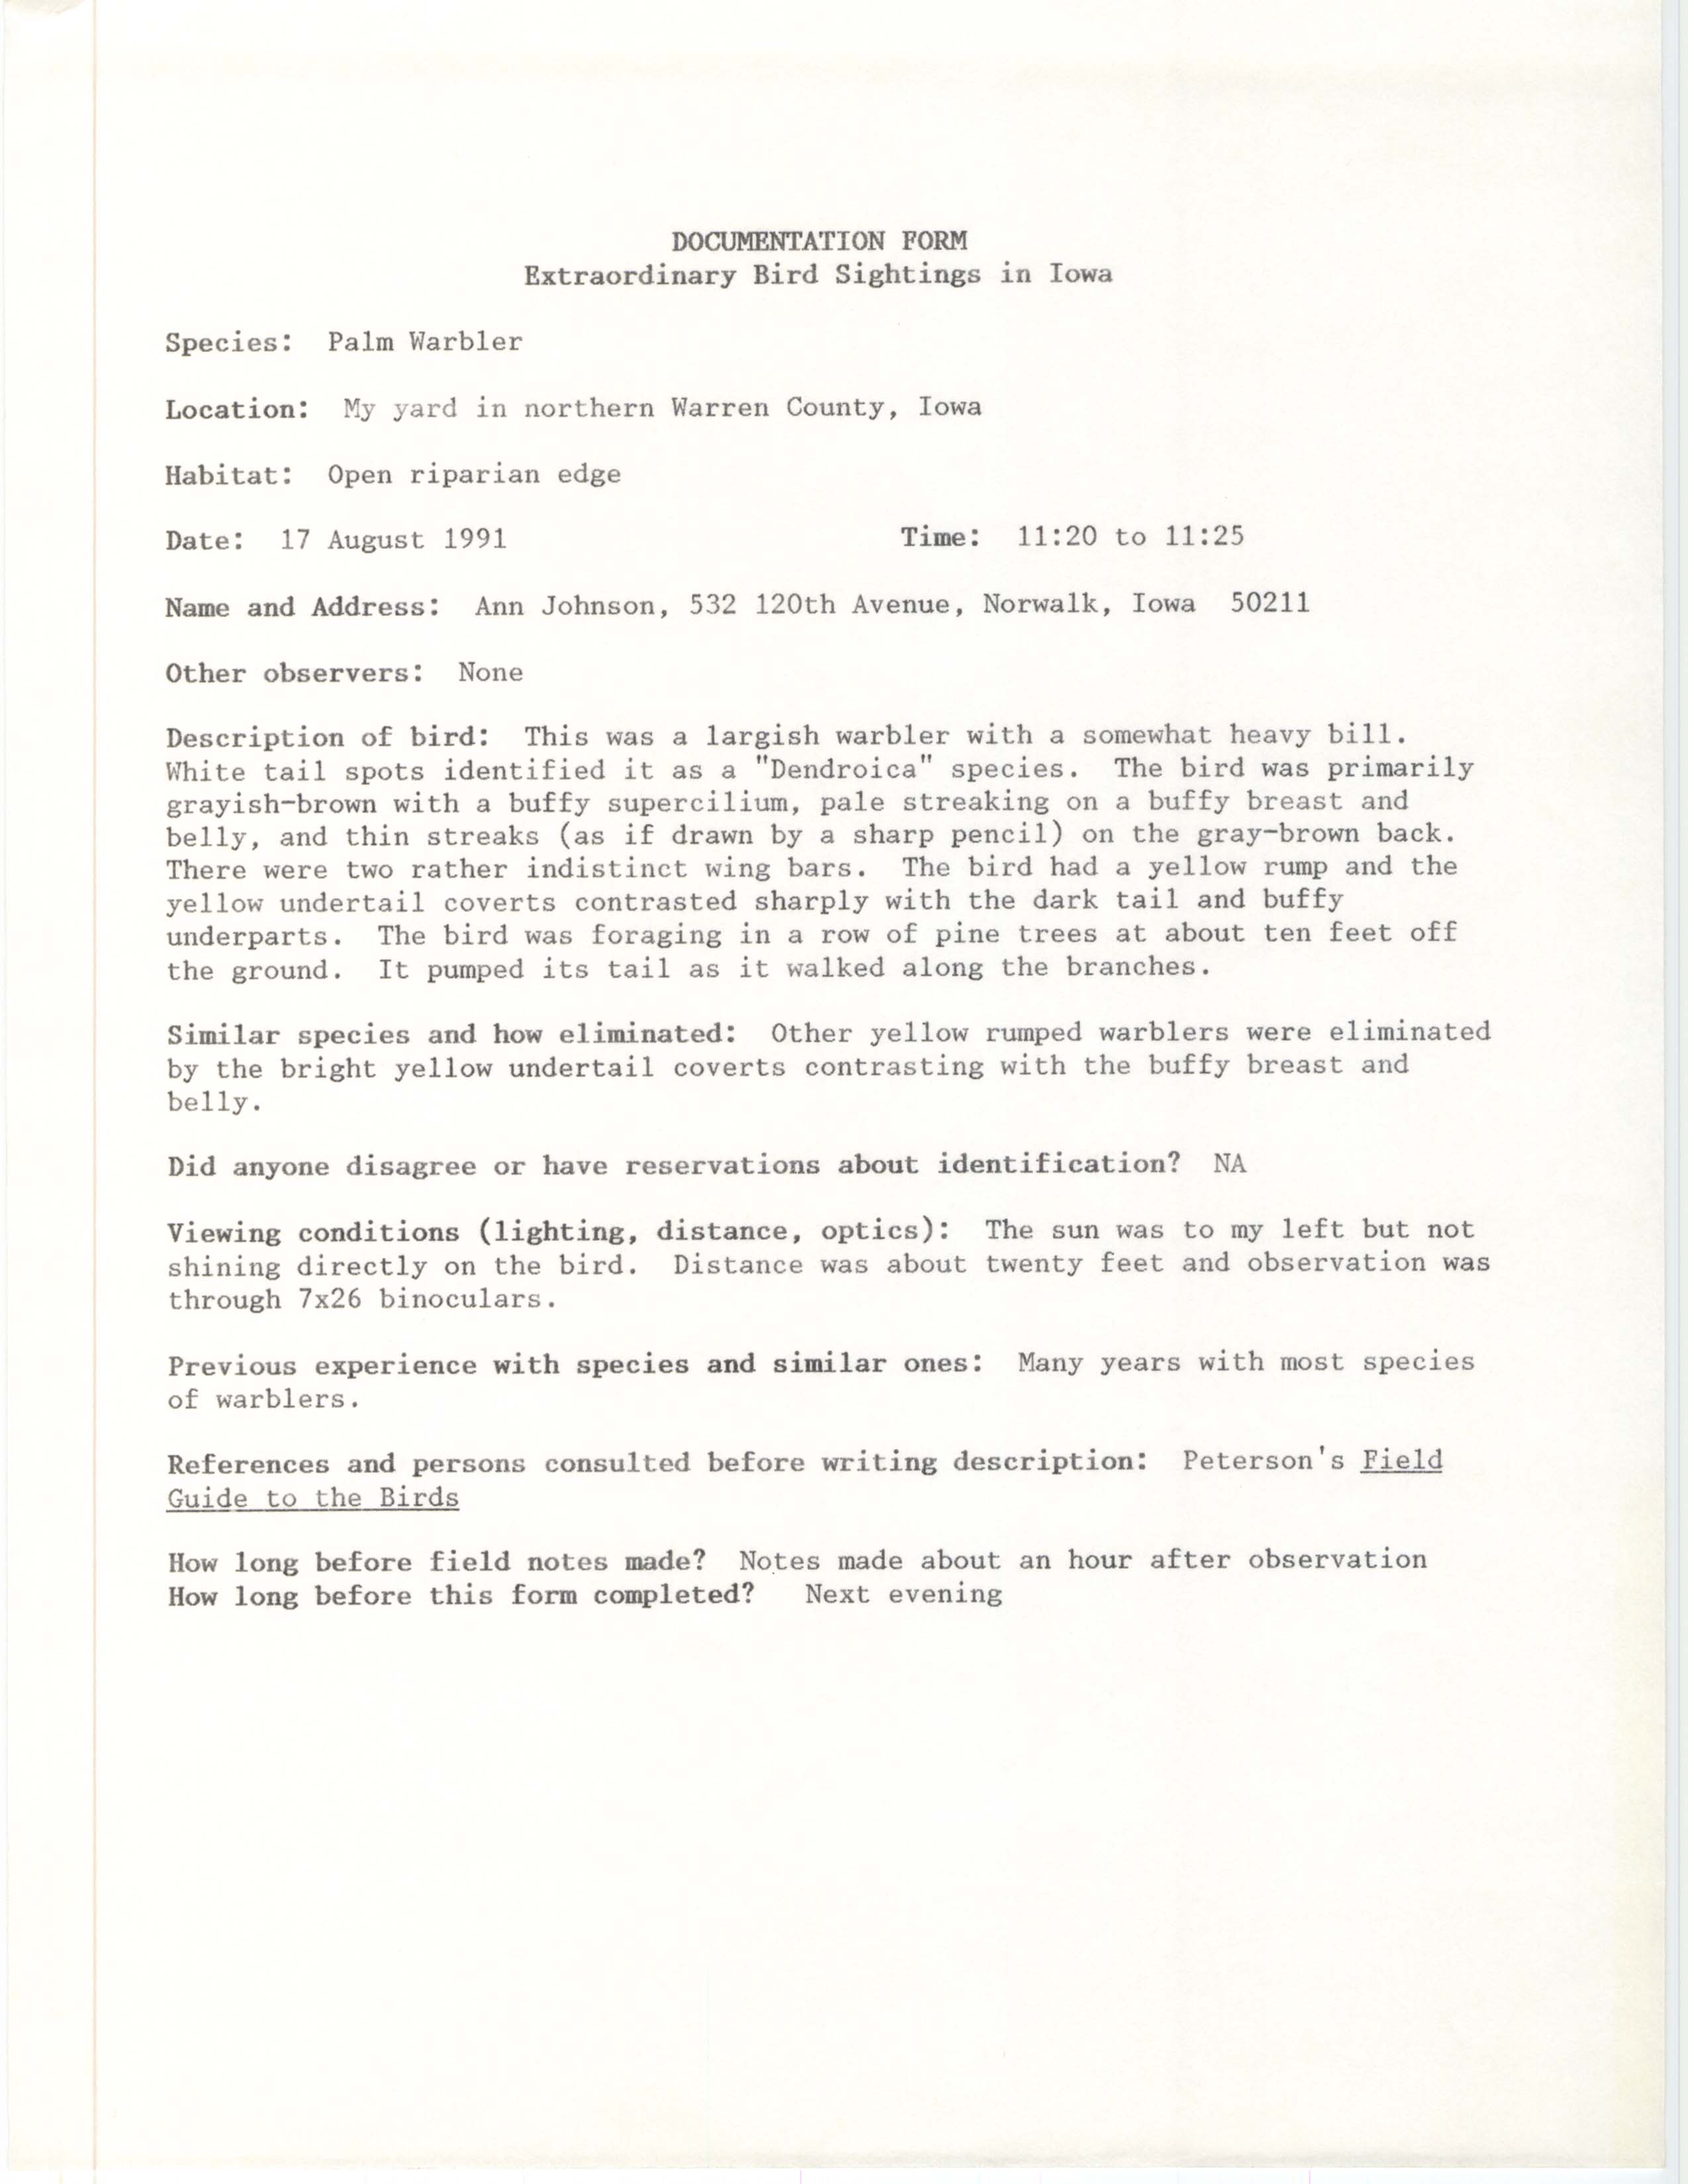 Rare bird documentation form for Palm Warbler in Greenfield Township in Warren County, 1991